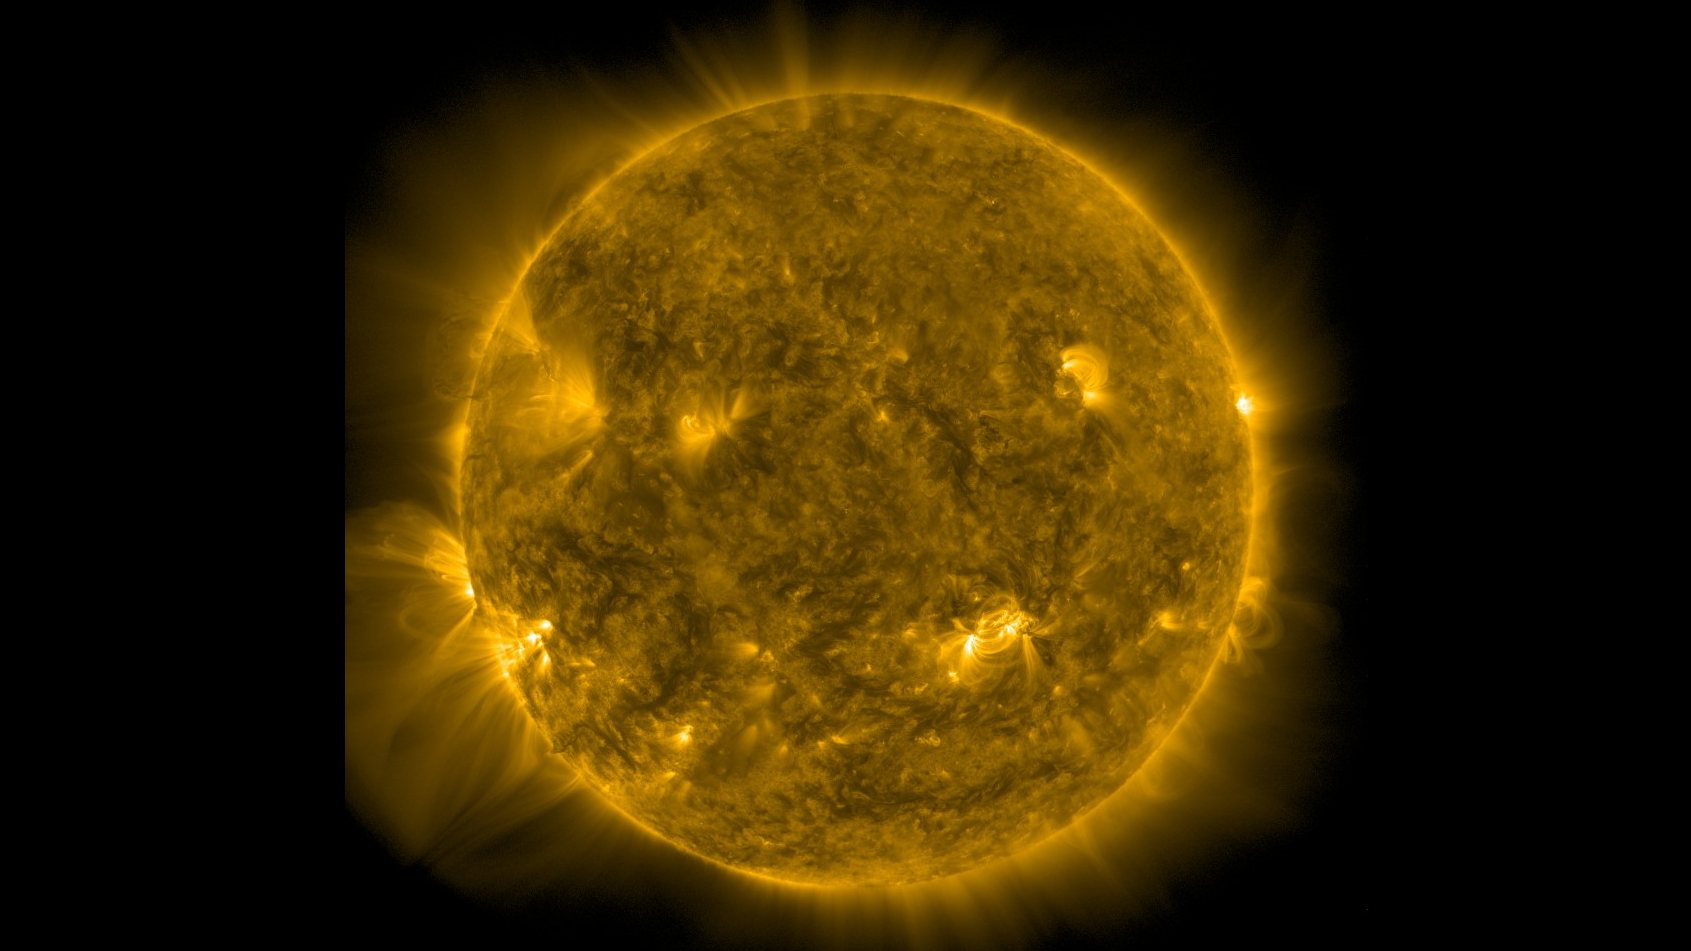 Huge, potentially disruptive sunspot will swing round to face Earth this weekend